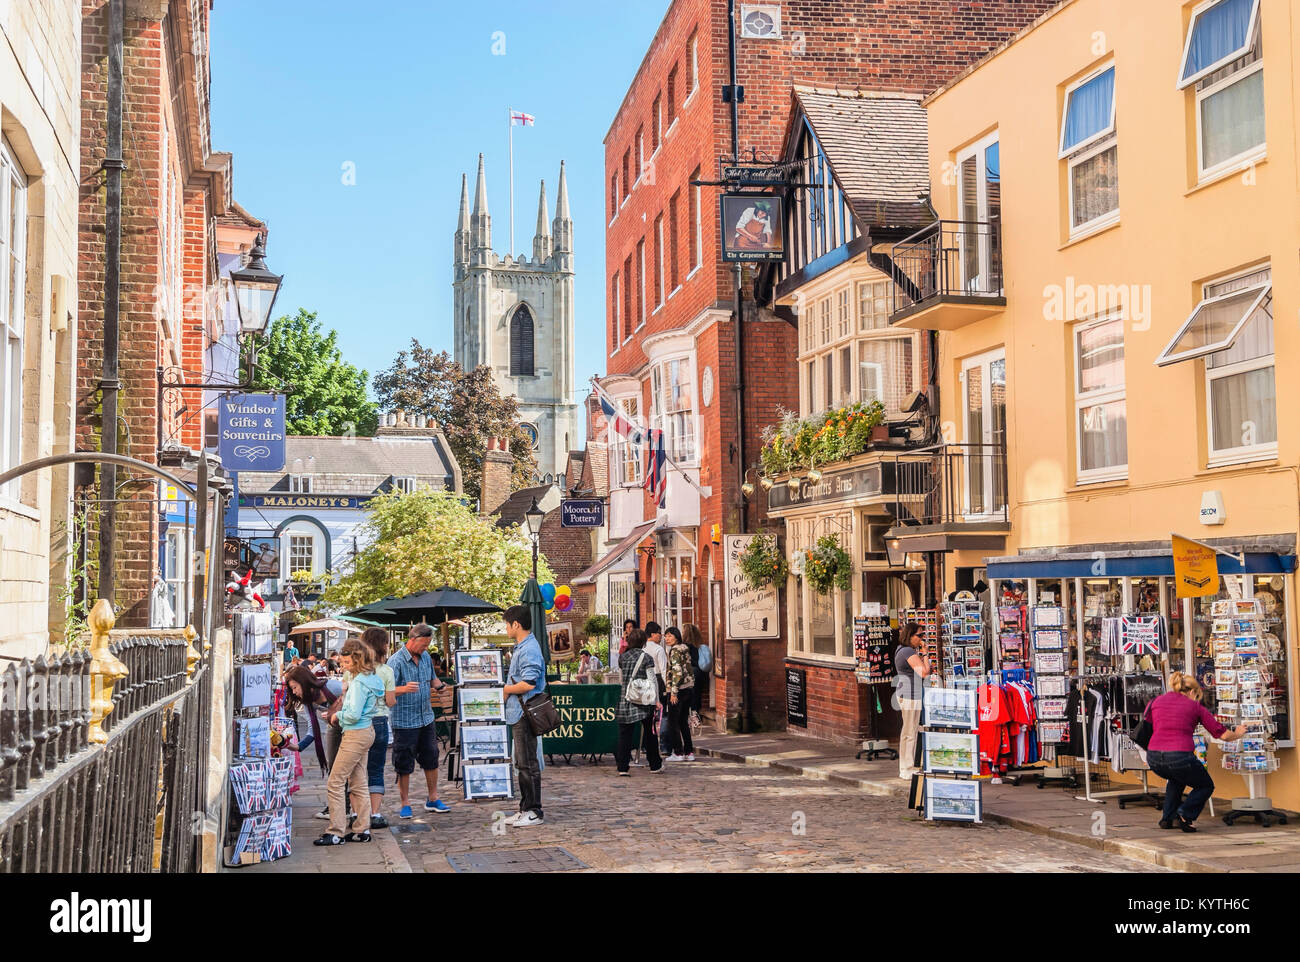 Historical town centre of Windsor, Berkshire, England Stock Photo